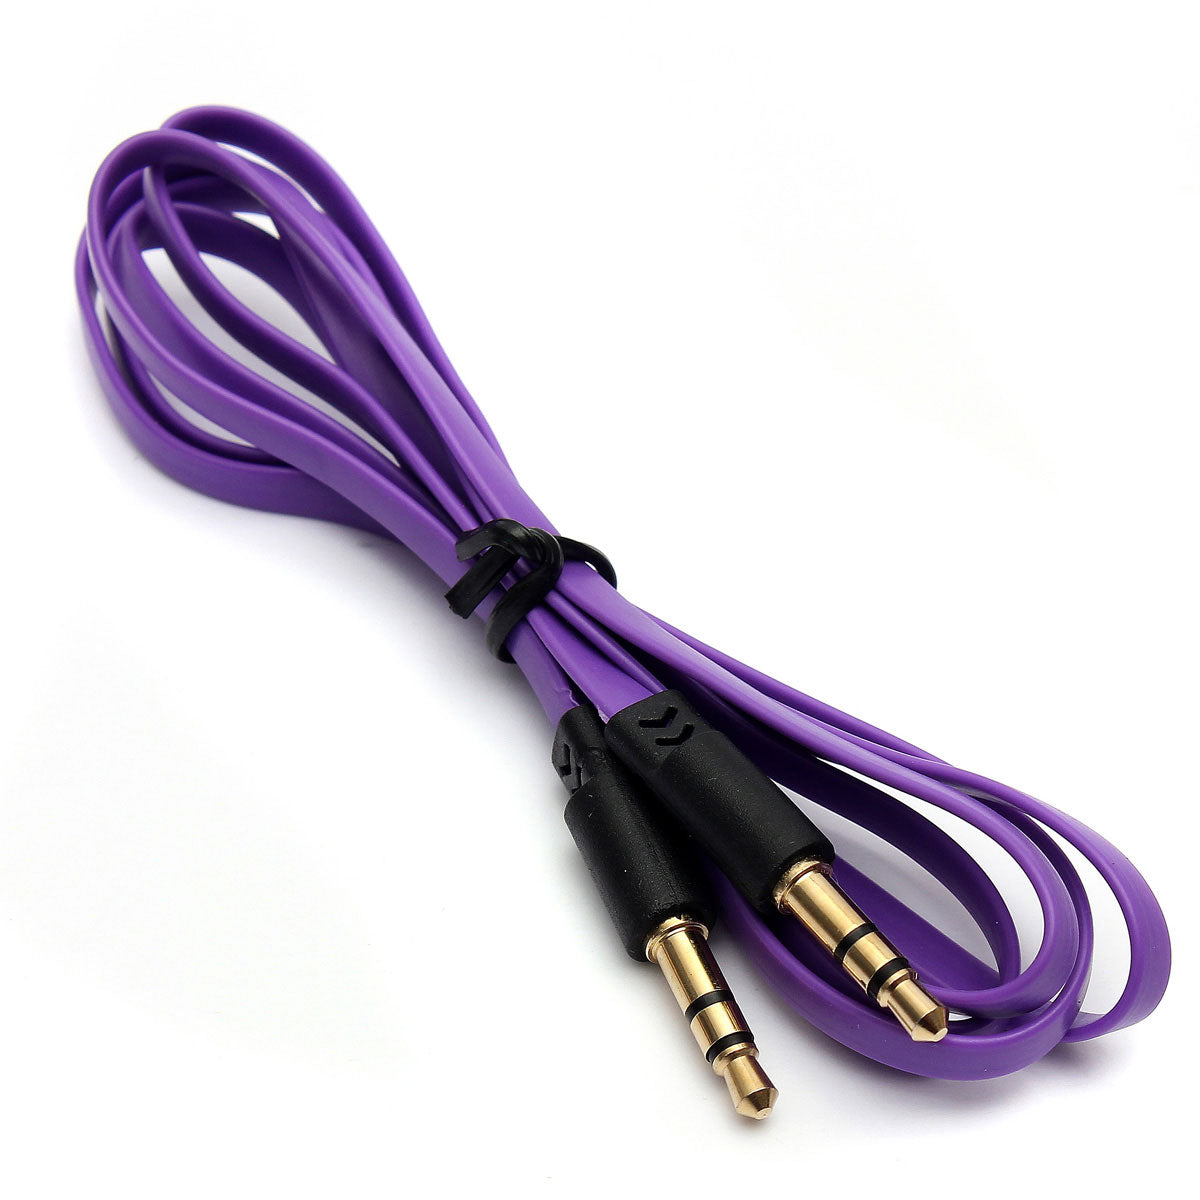 3.5mm Male To Male Car Stereo Audio Auxiliary AUX Extension Cable